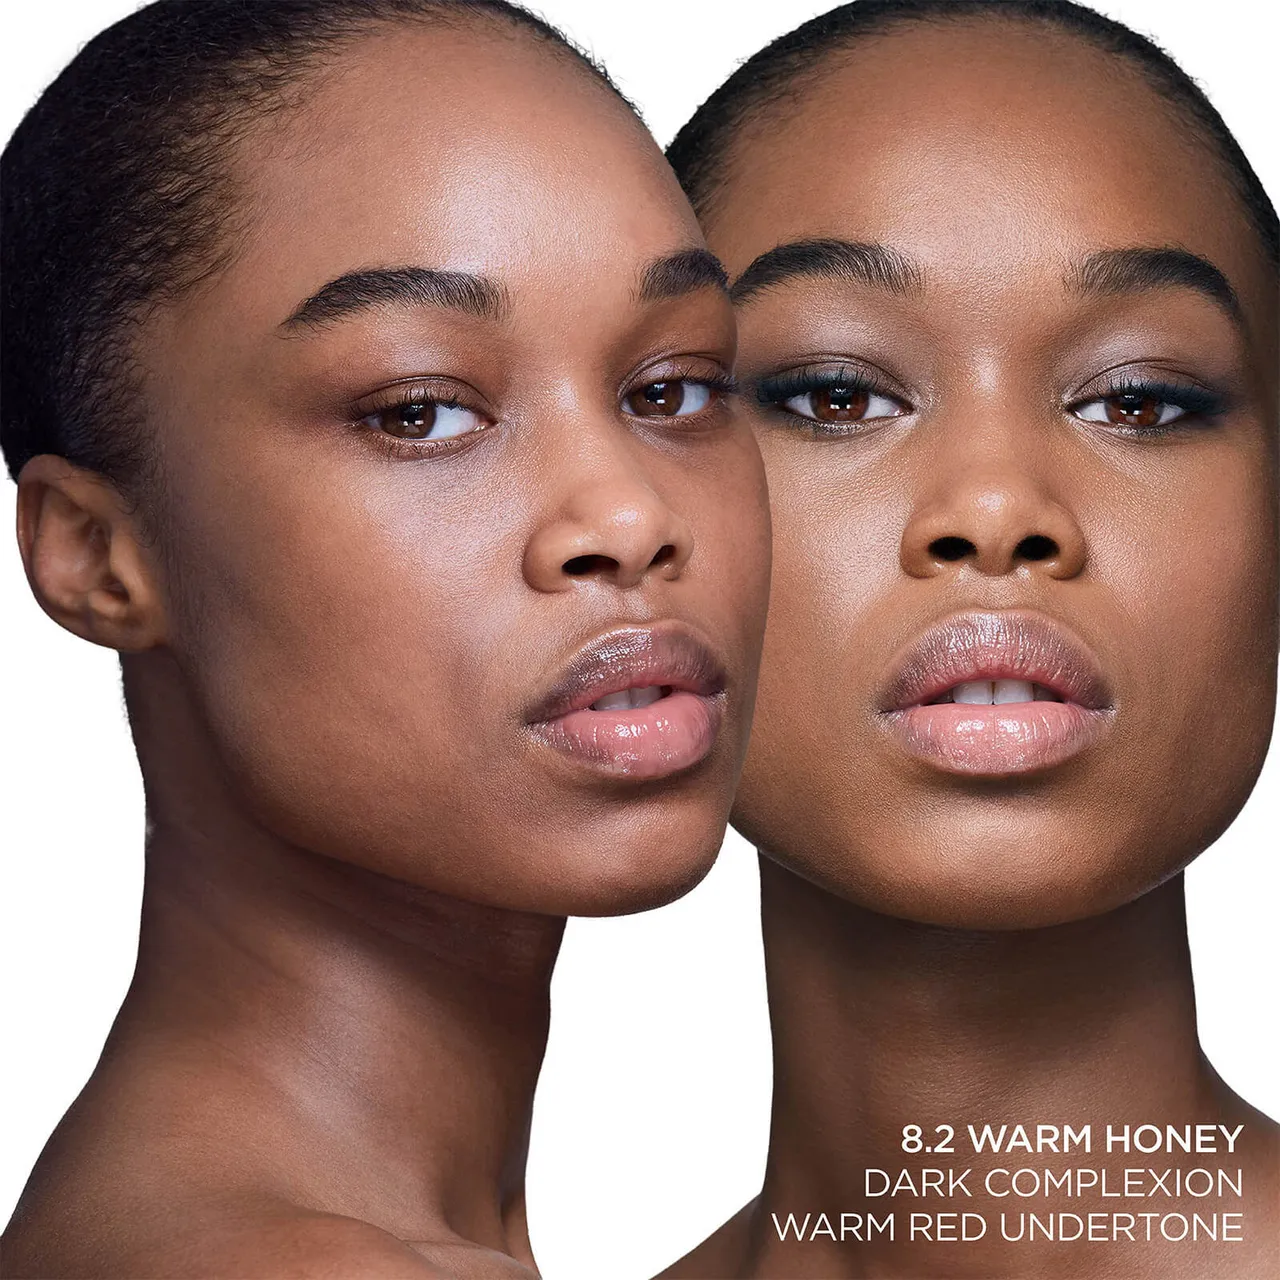 Tom Ford Traceless Soft Matte Foundation 30ml (Various Shades) - Warm Honey